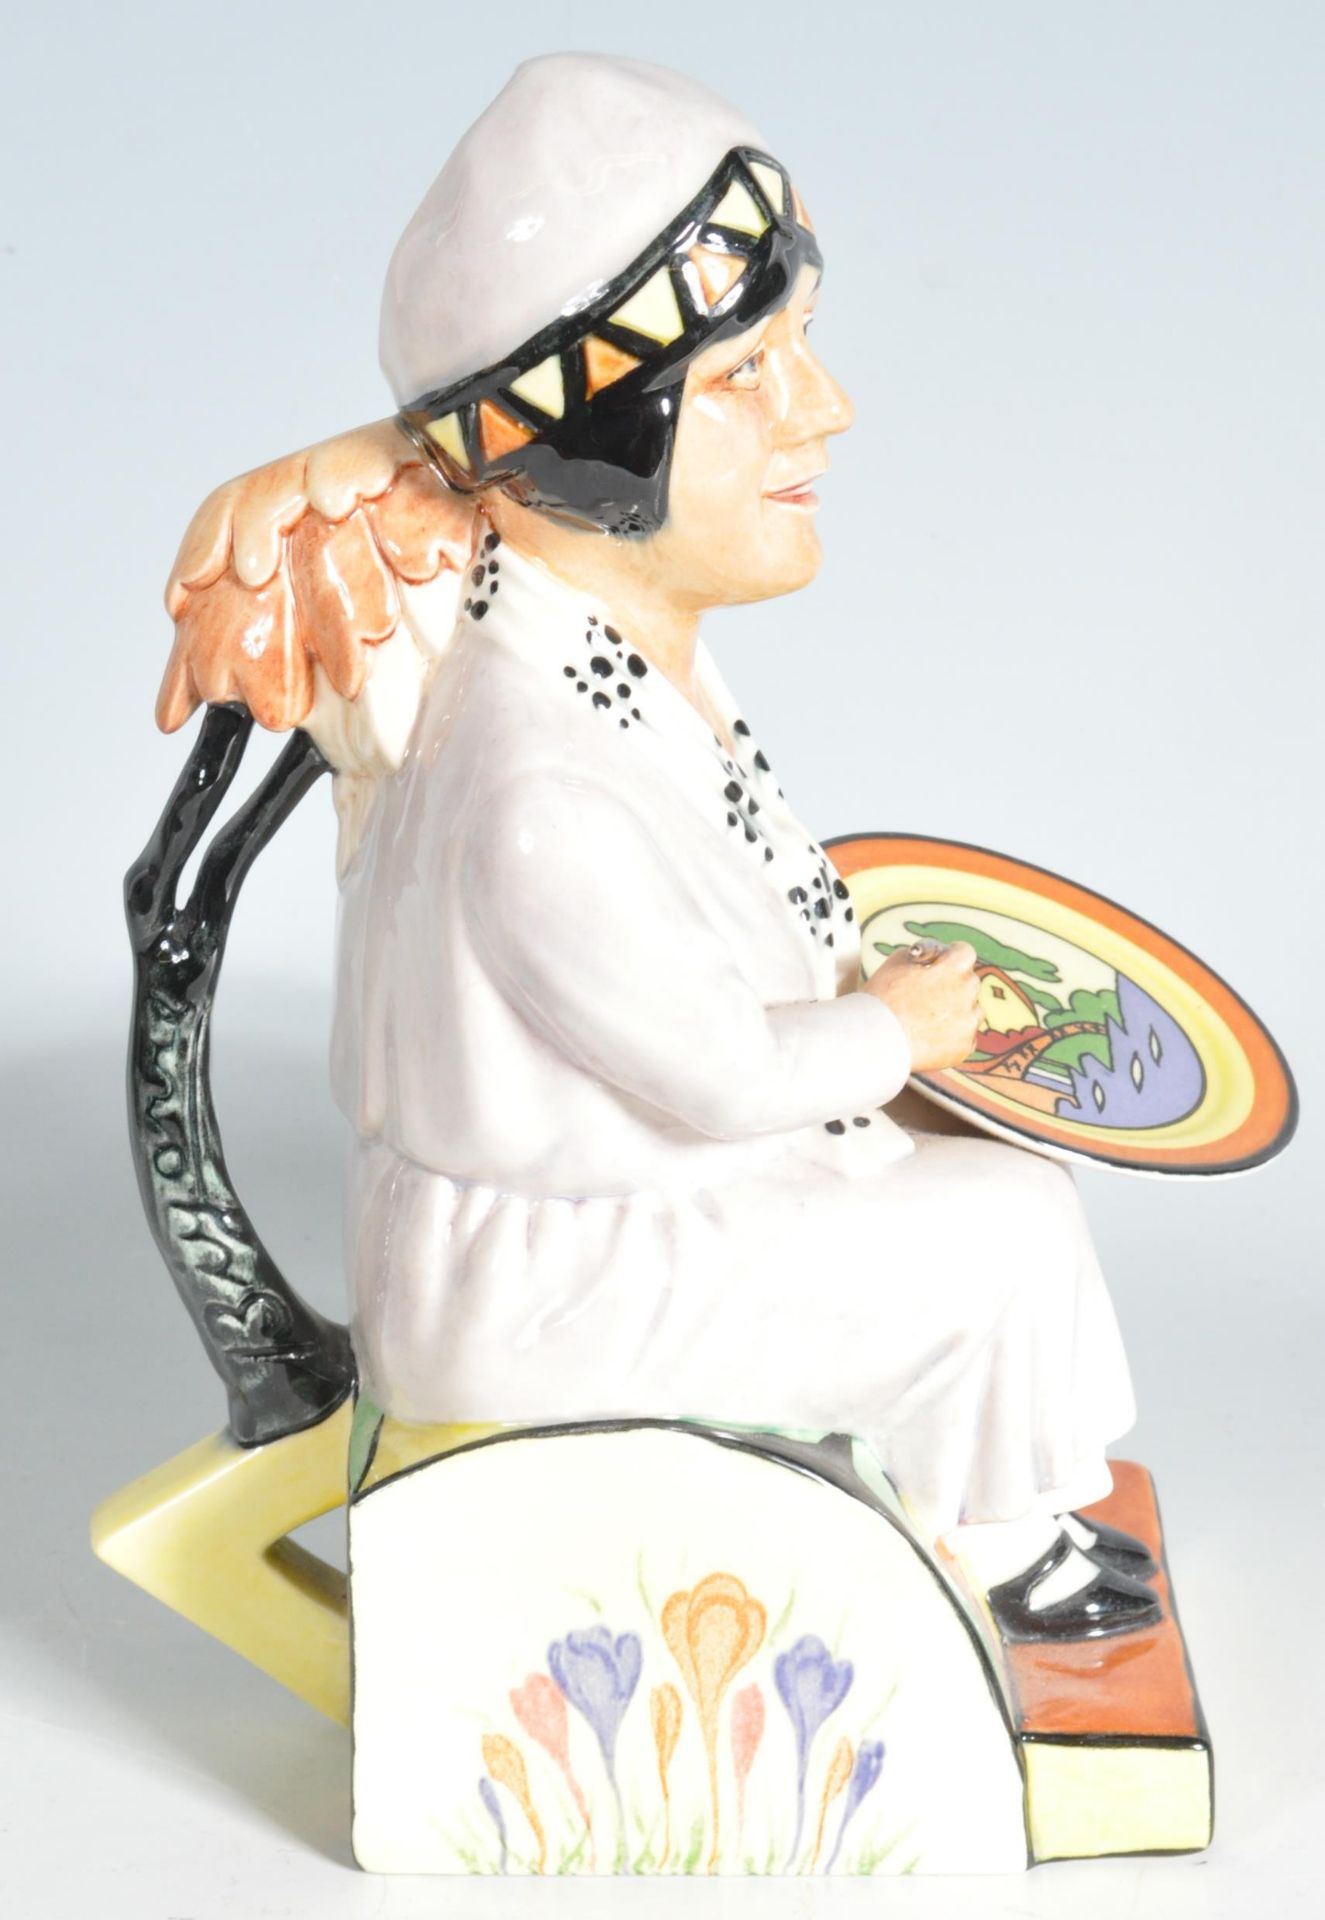 VINTAGE LATE 20TH CENTURY CERAMIC KEVIN FRANCIS FIGURINE OF CLARICE CLIFF - Image 4 of 6